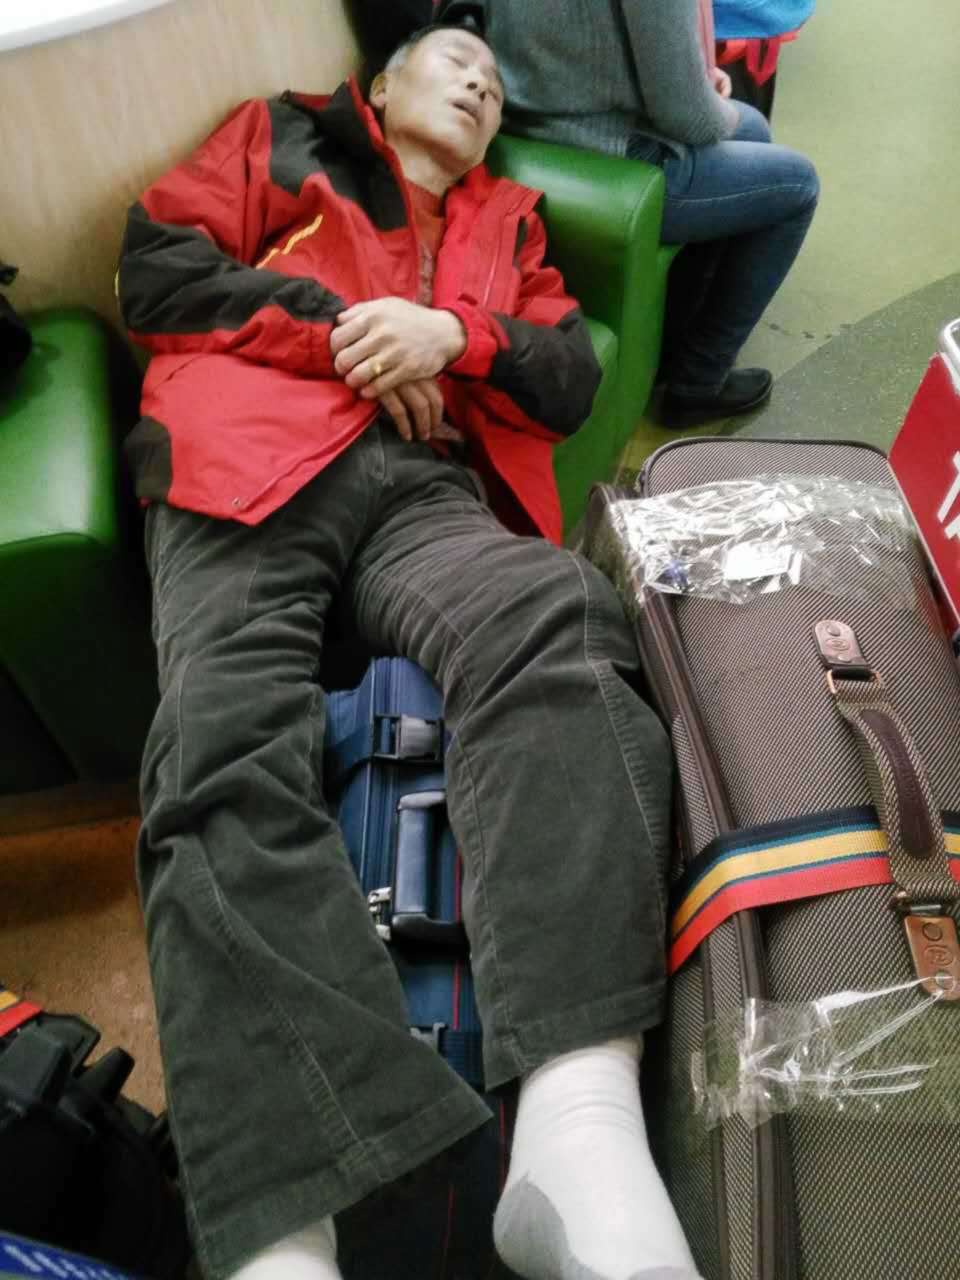 PHOTO: Yuanjun Cui, who has stage 4 cancer, lies on luggage after U.S. Customs and Border Protection issued his deportation on May 21, 2018.